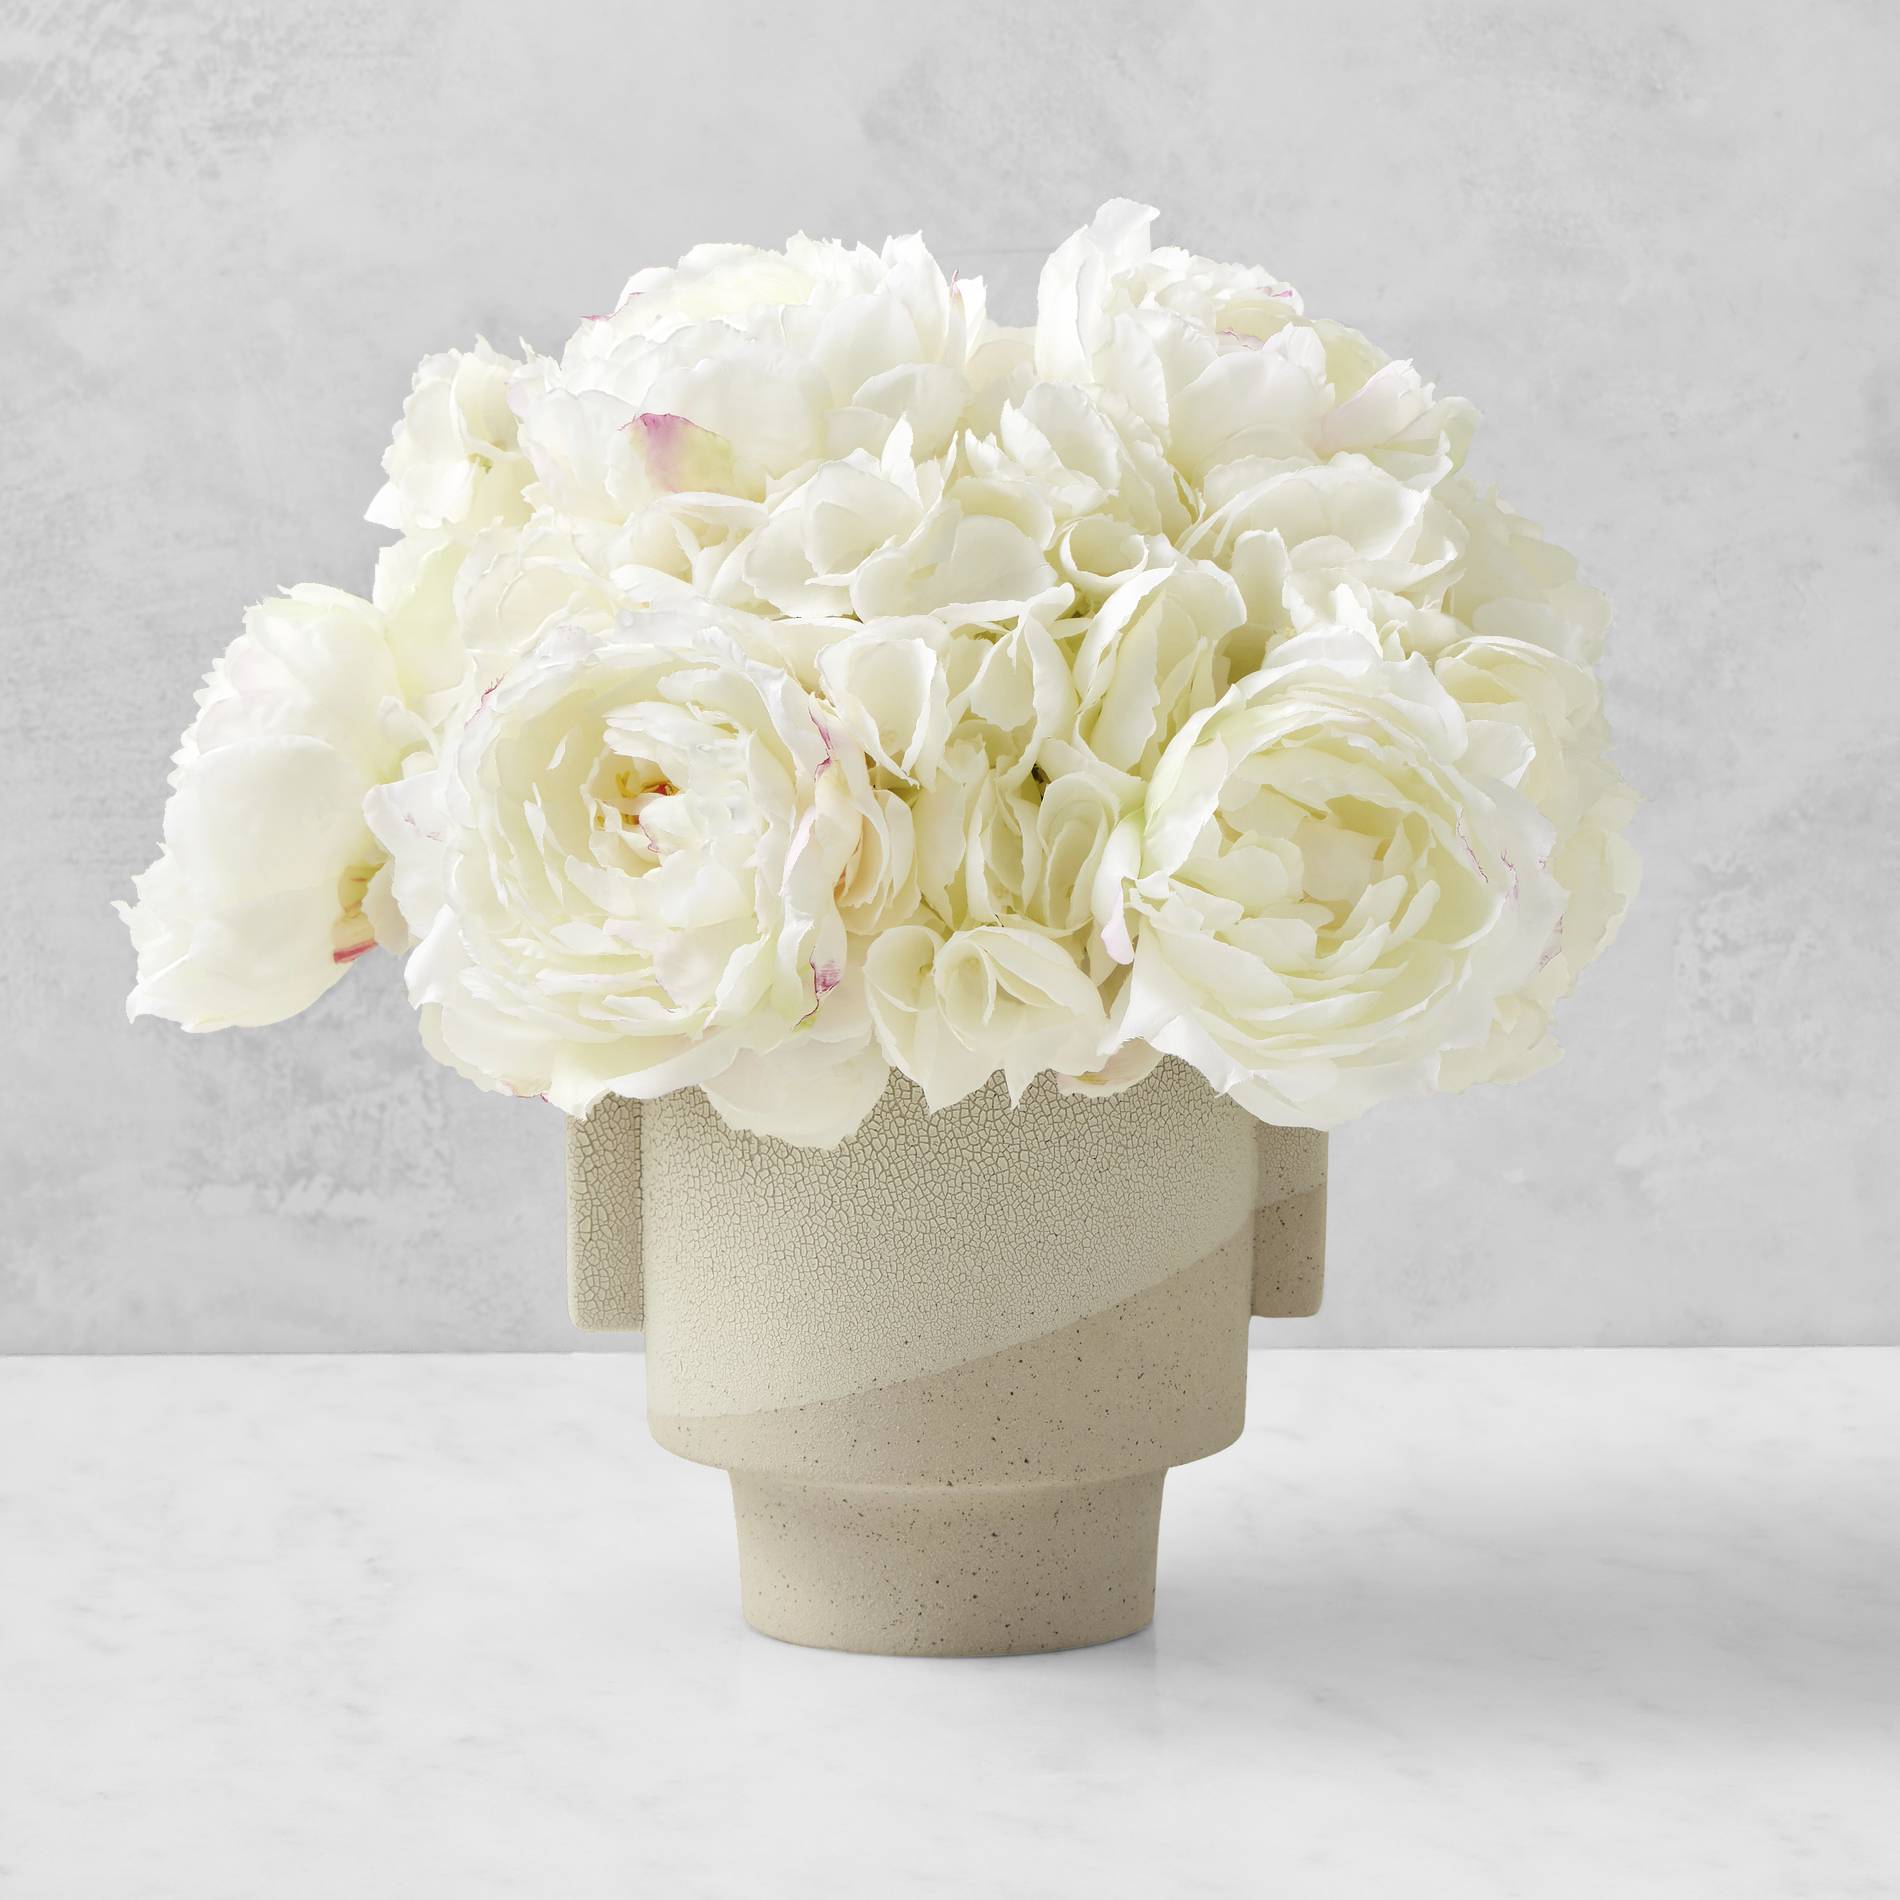 Celebrity Florist Jeff Leatham Collabs With Williams Sonoma